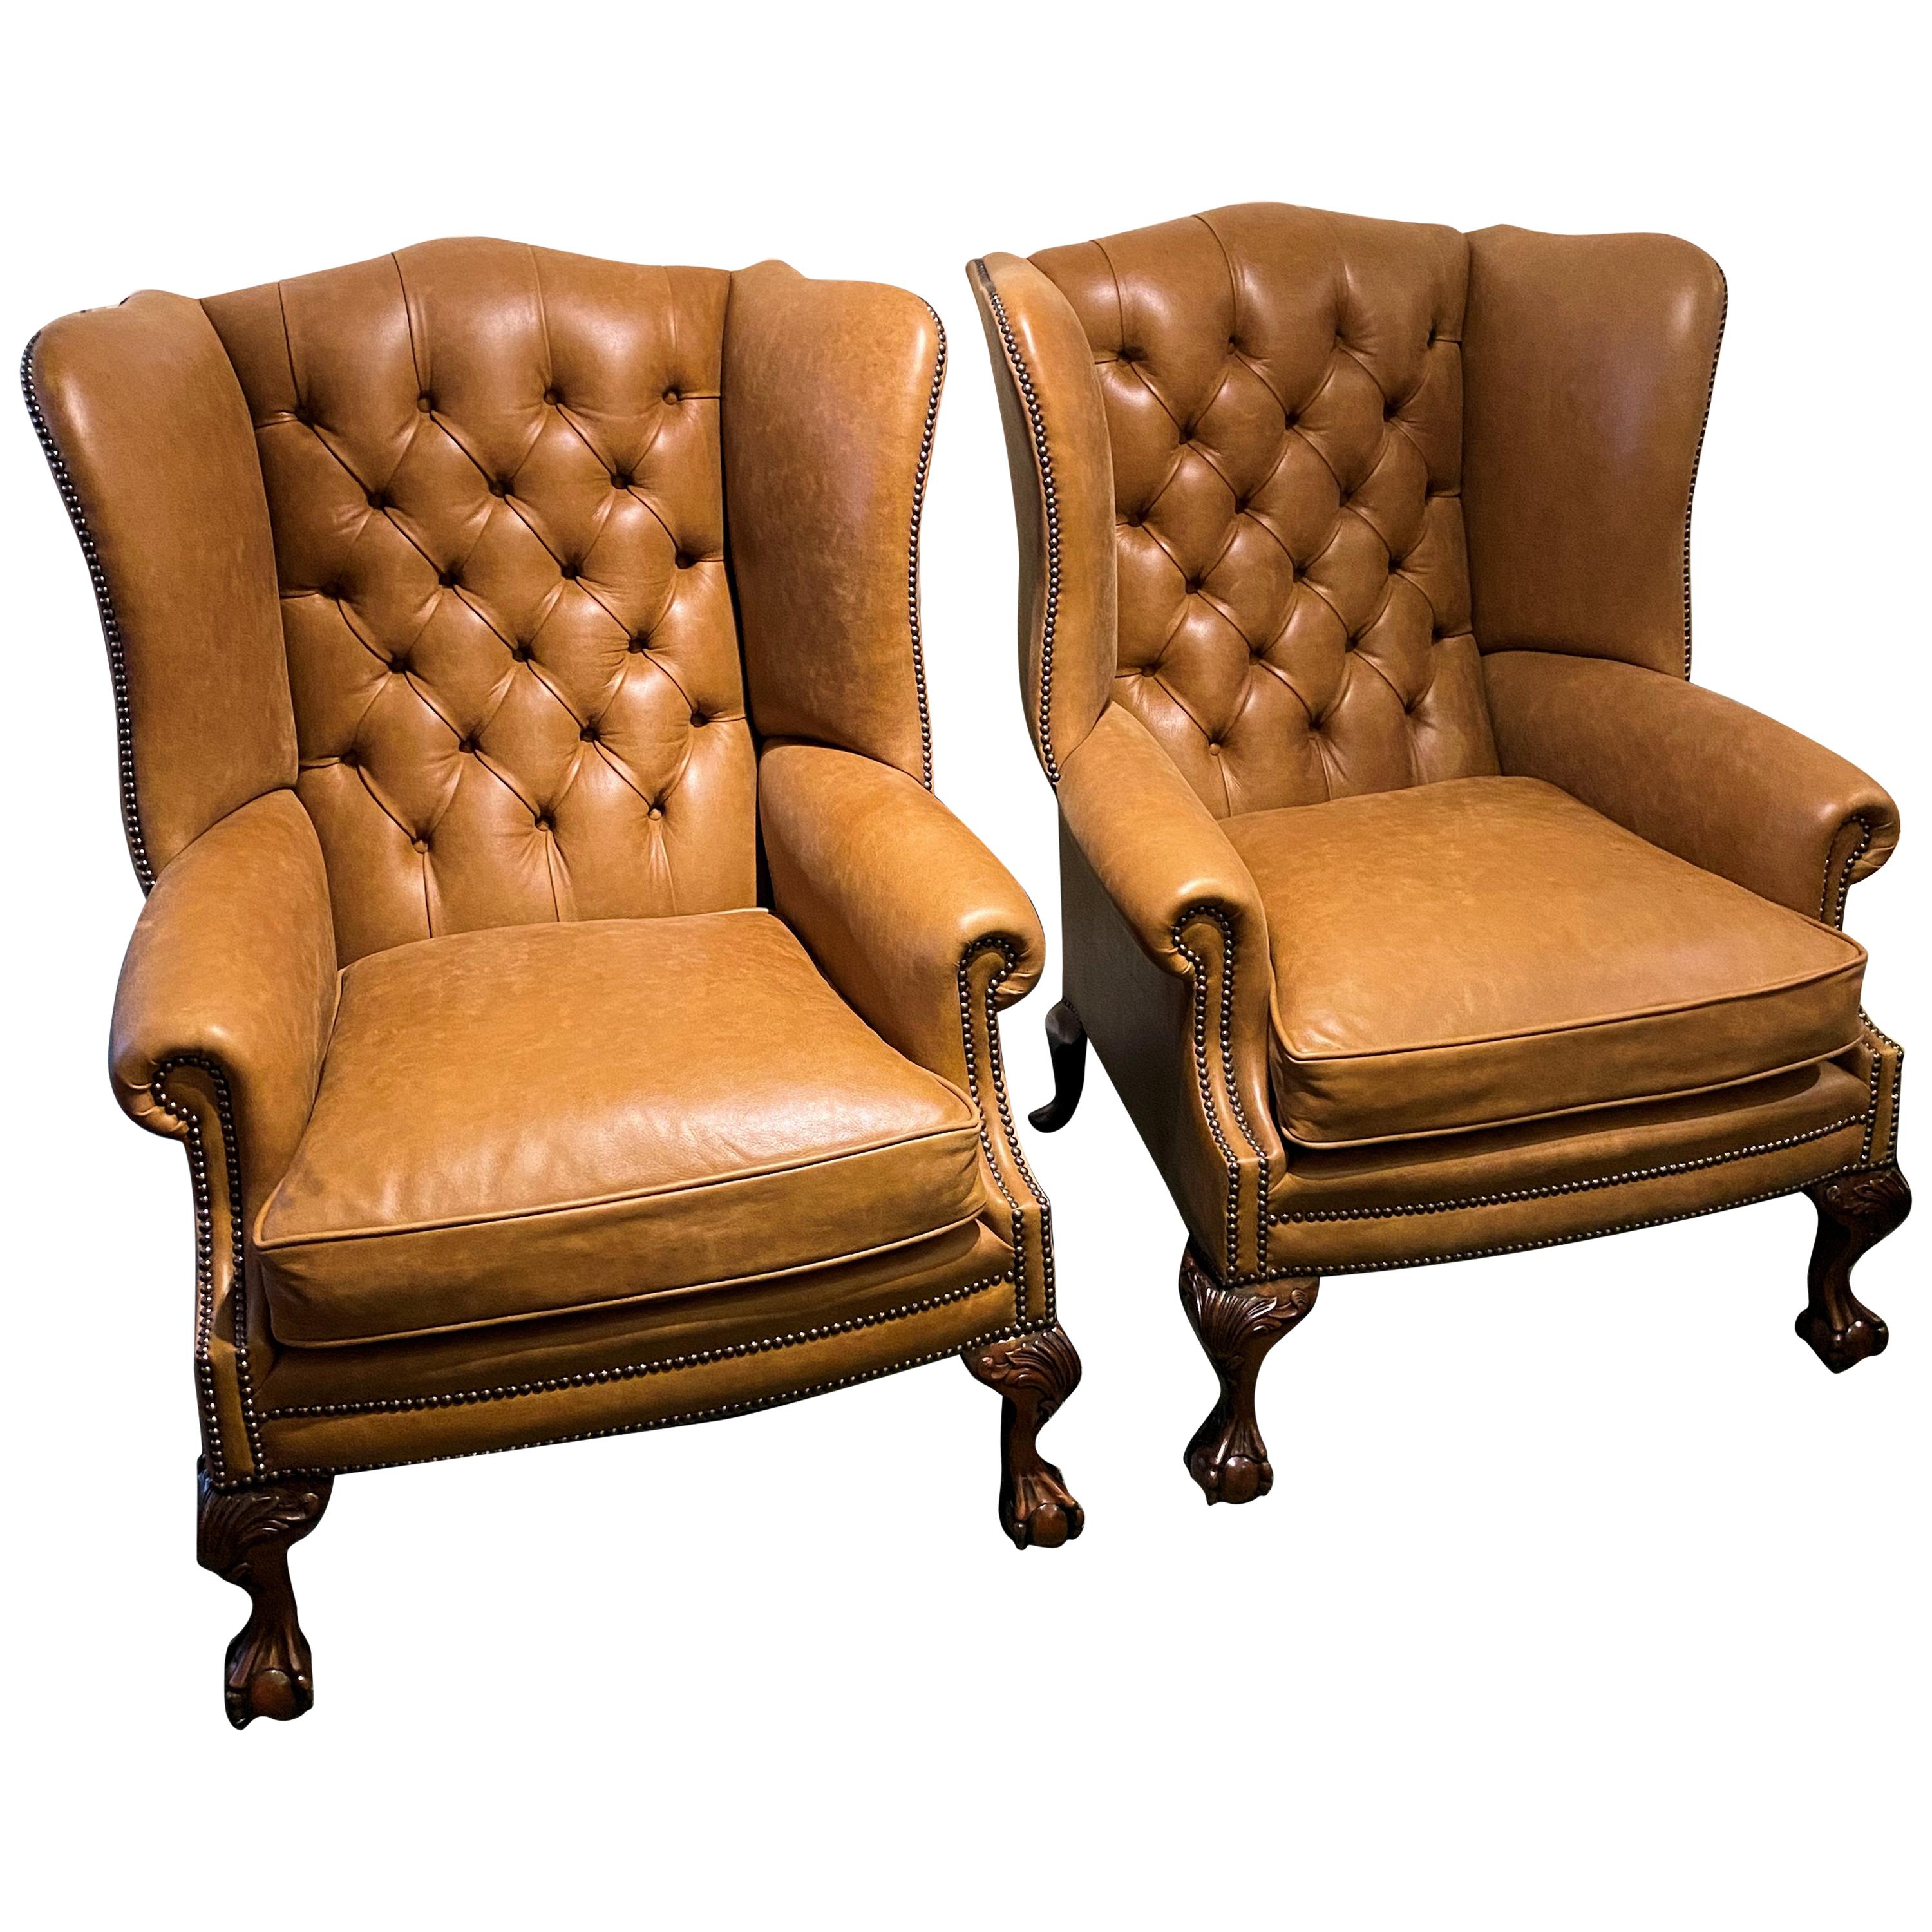 Pair of Tan English Leather Wing Armchairs